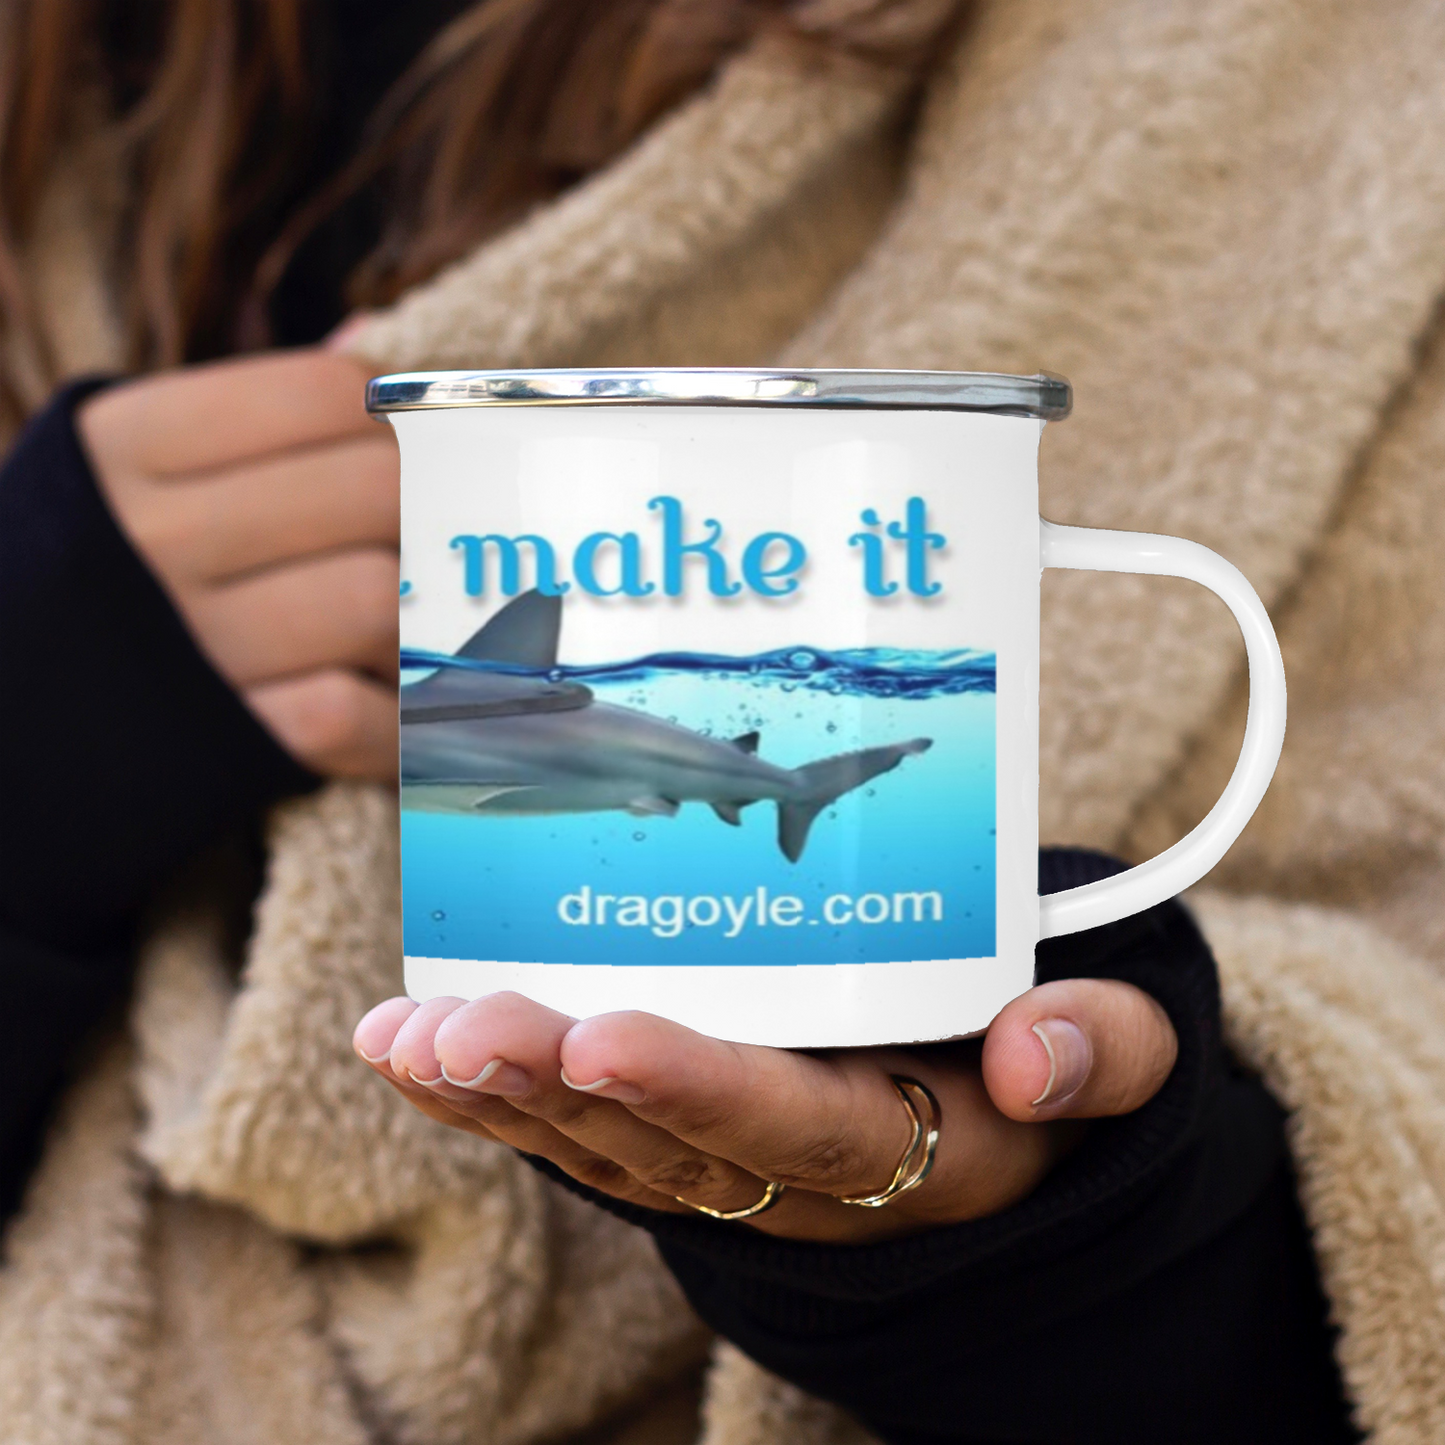 Fuel your determination and motivation with our Fake It Til You Make It Vintage Enamel Mug! This durable, retro-inspired mug serves as a daily reminder to keep pushing towards your goals. Perfect for your morning coffee or tea, it's a must-have for any go-getter.